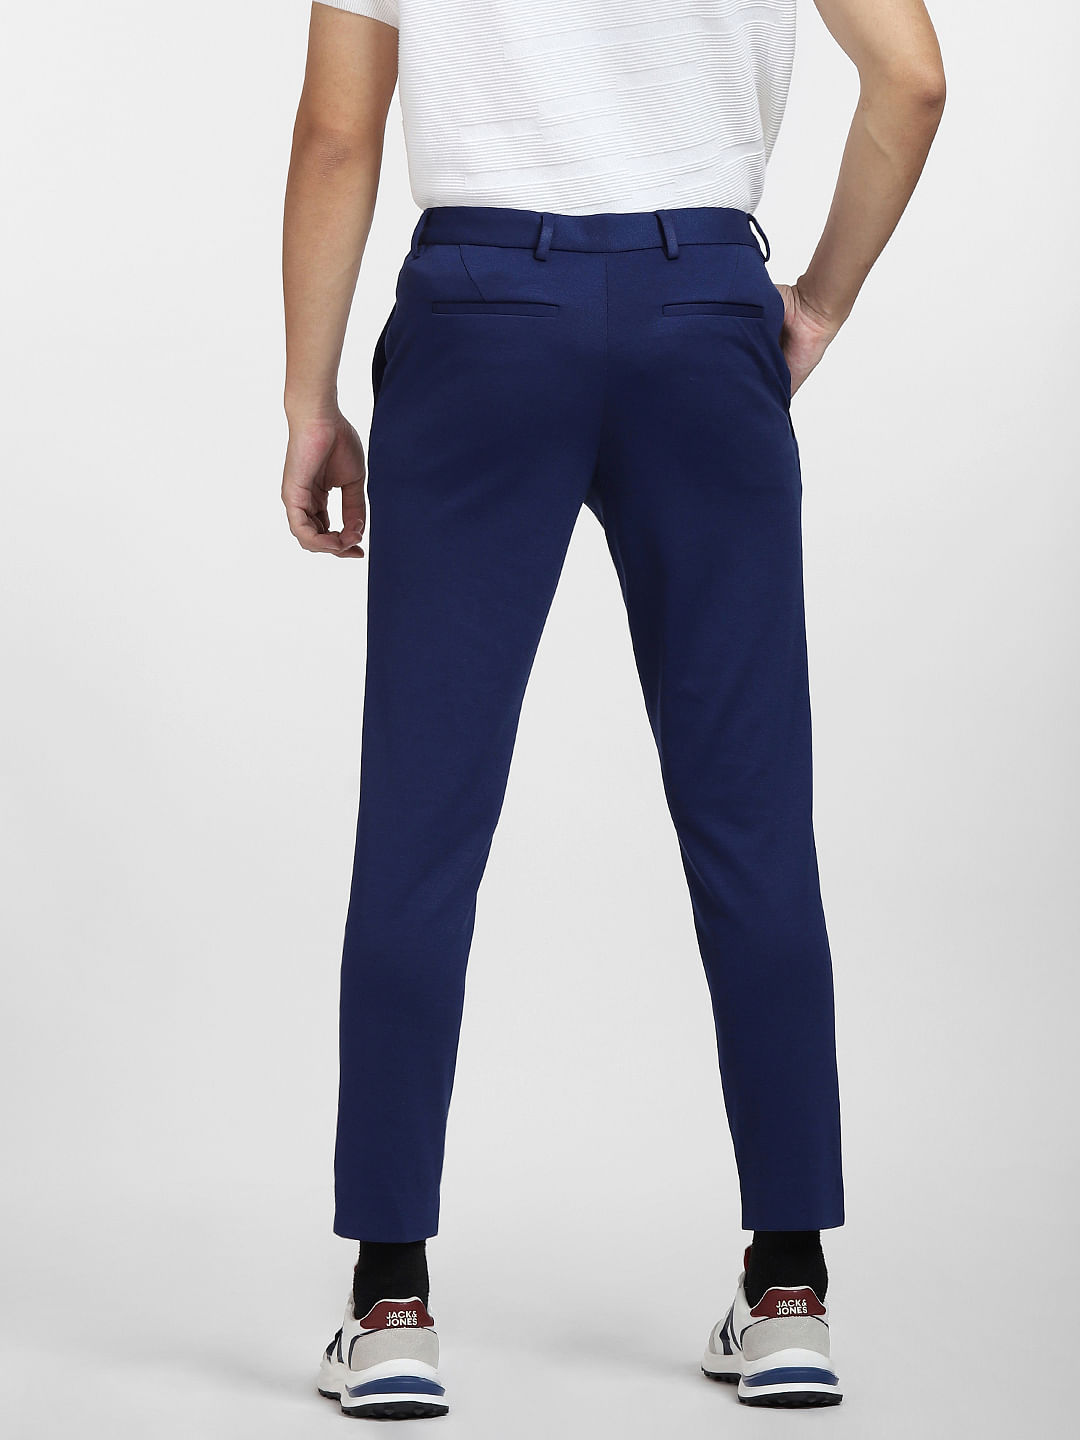 Buy Royal Blue Trousers With Functional Pockets For Men Online  Best  Prices in India  Uniform Bucket  UNIFORM BUCKET